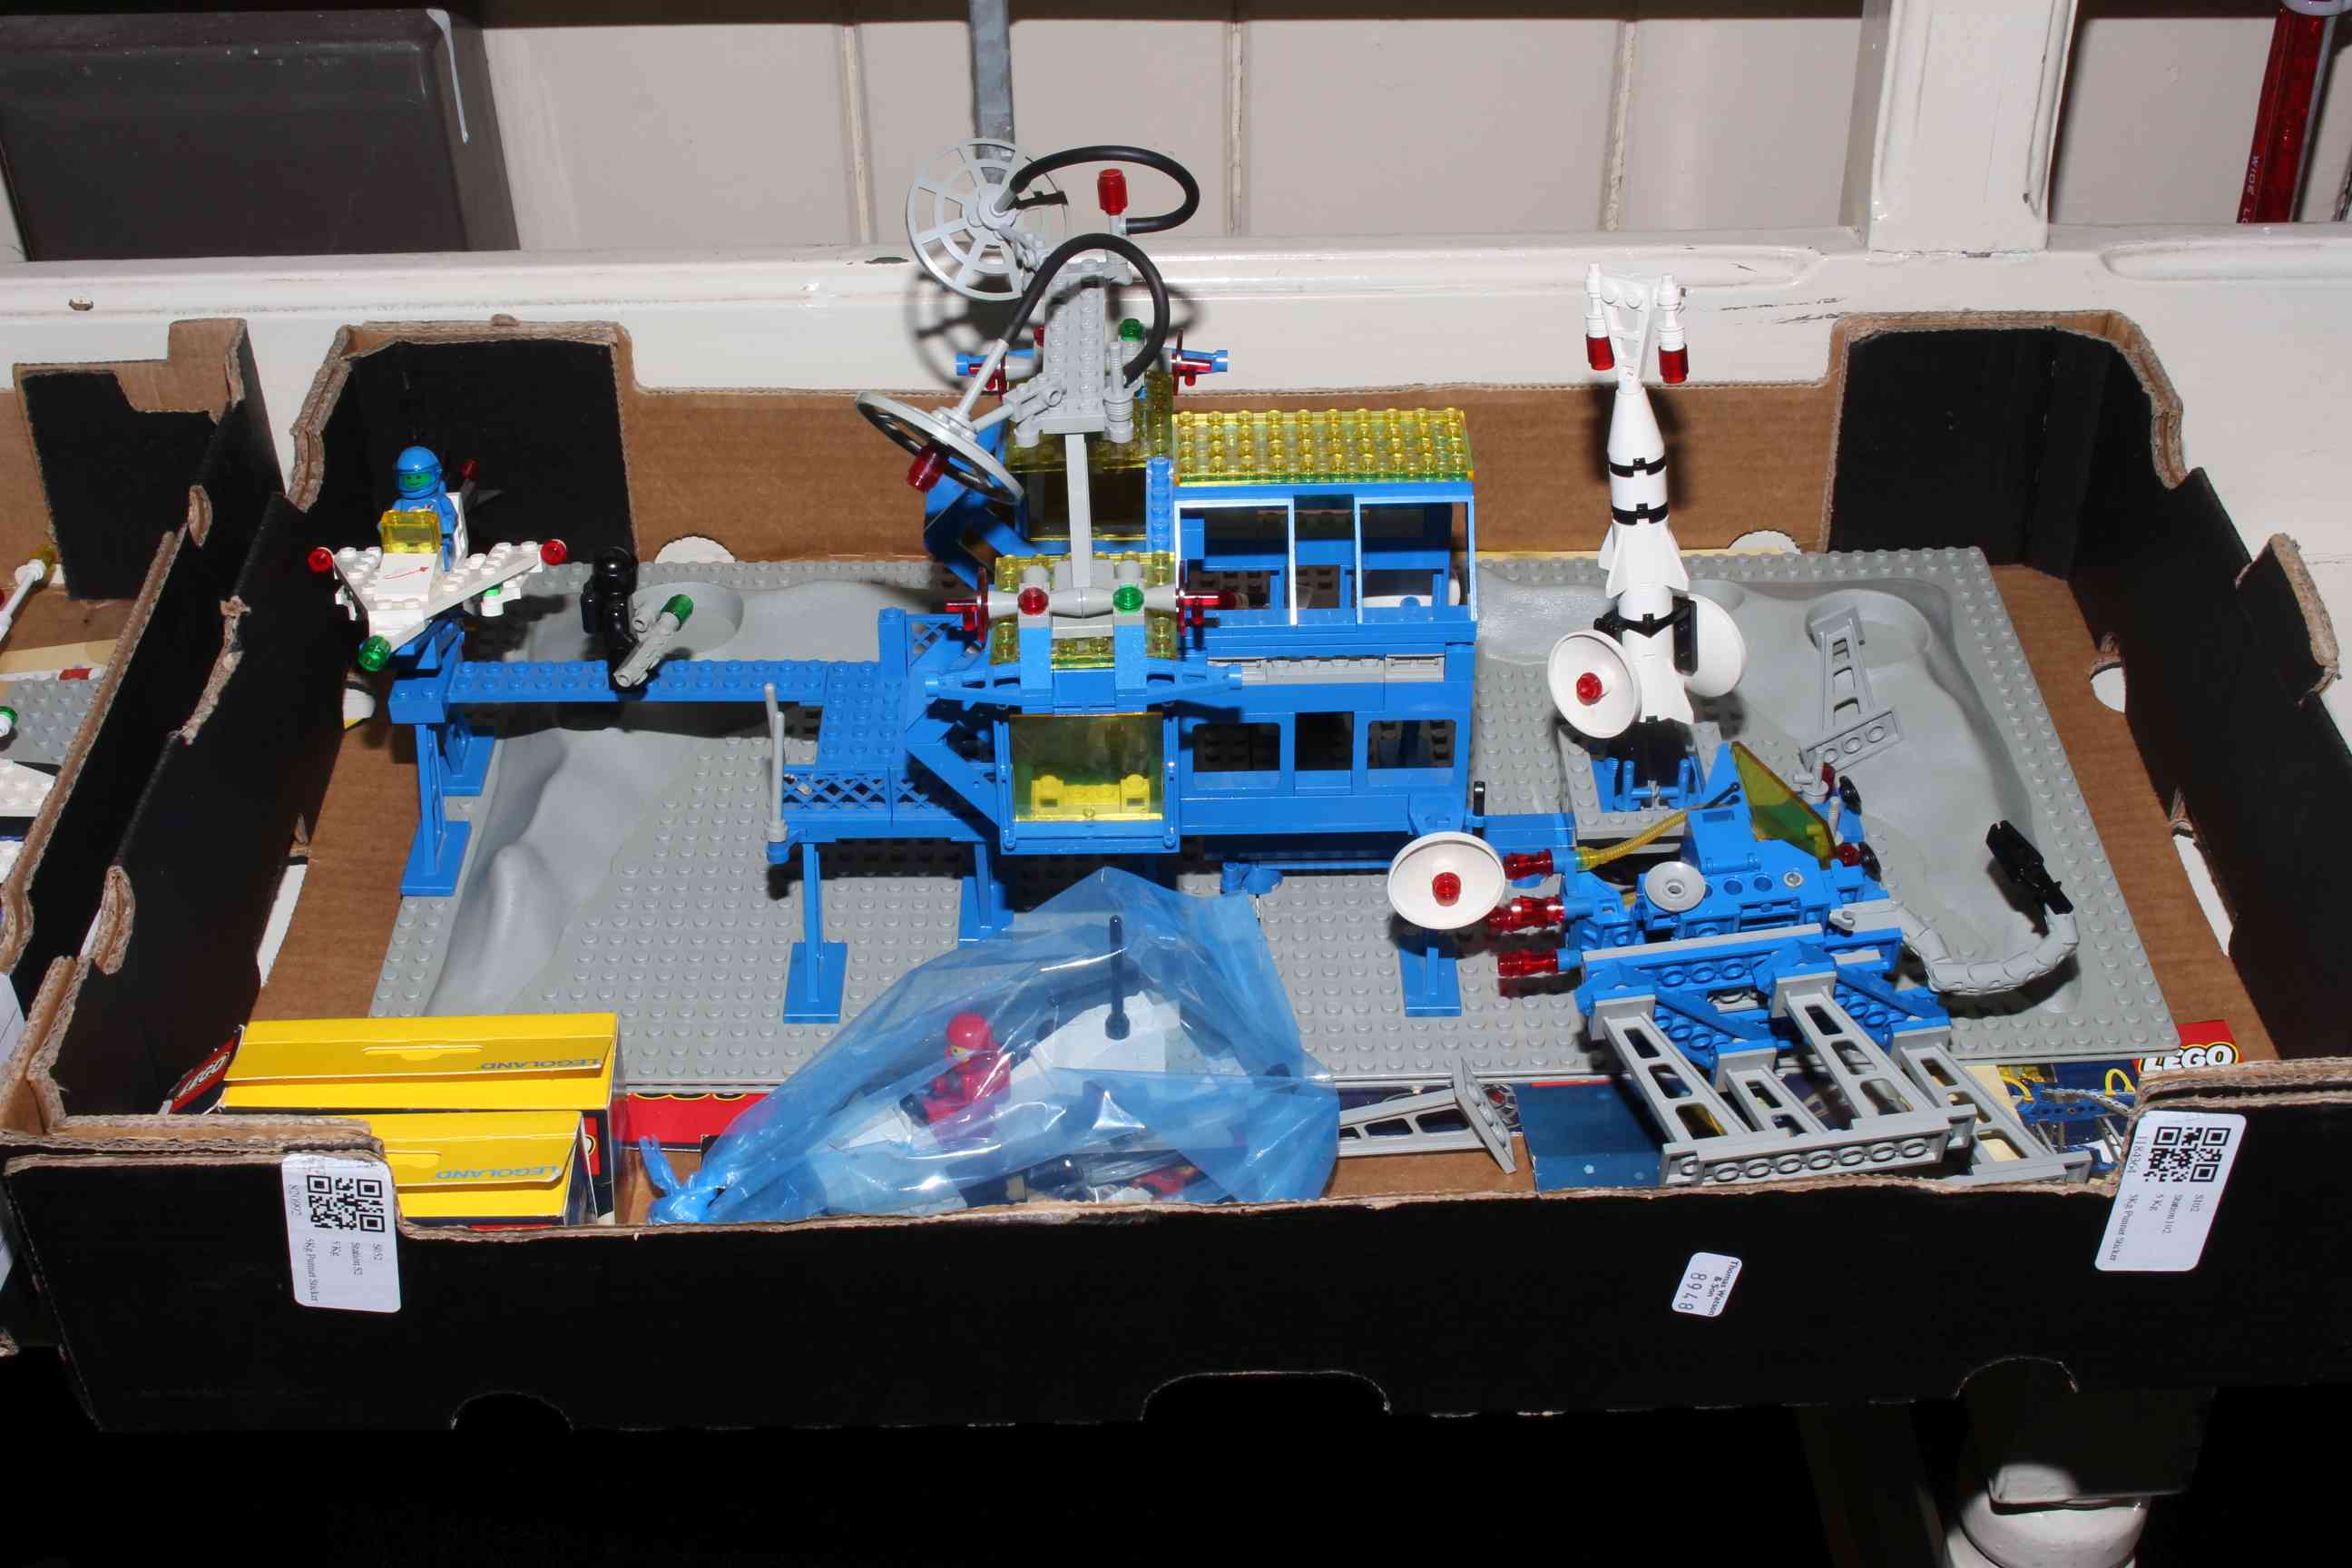 Three Lego kits and accessories, numbers 6971, 6882, 6842, and two figures 1557 and 6804.